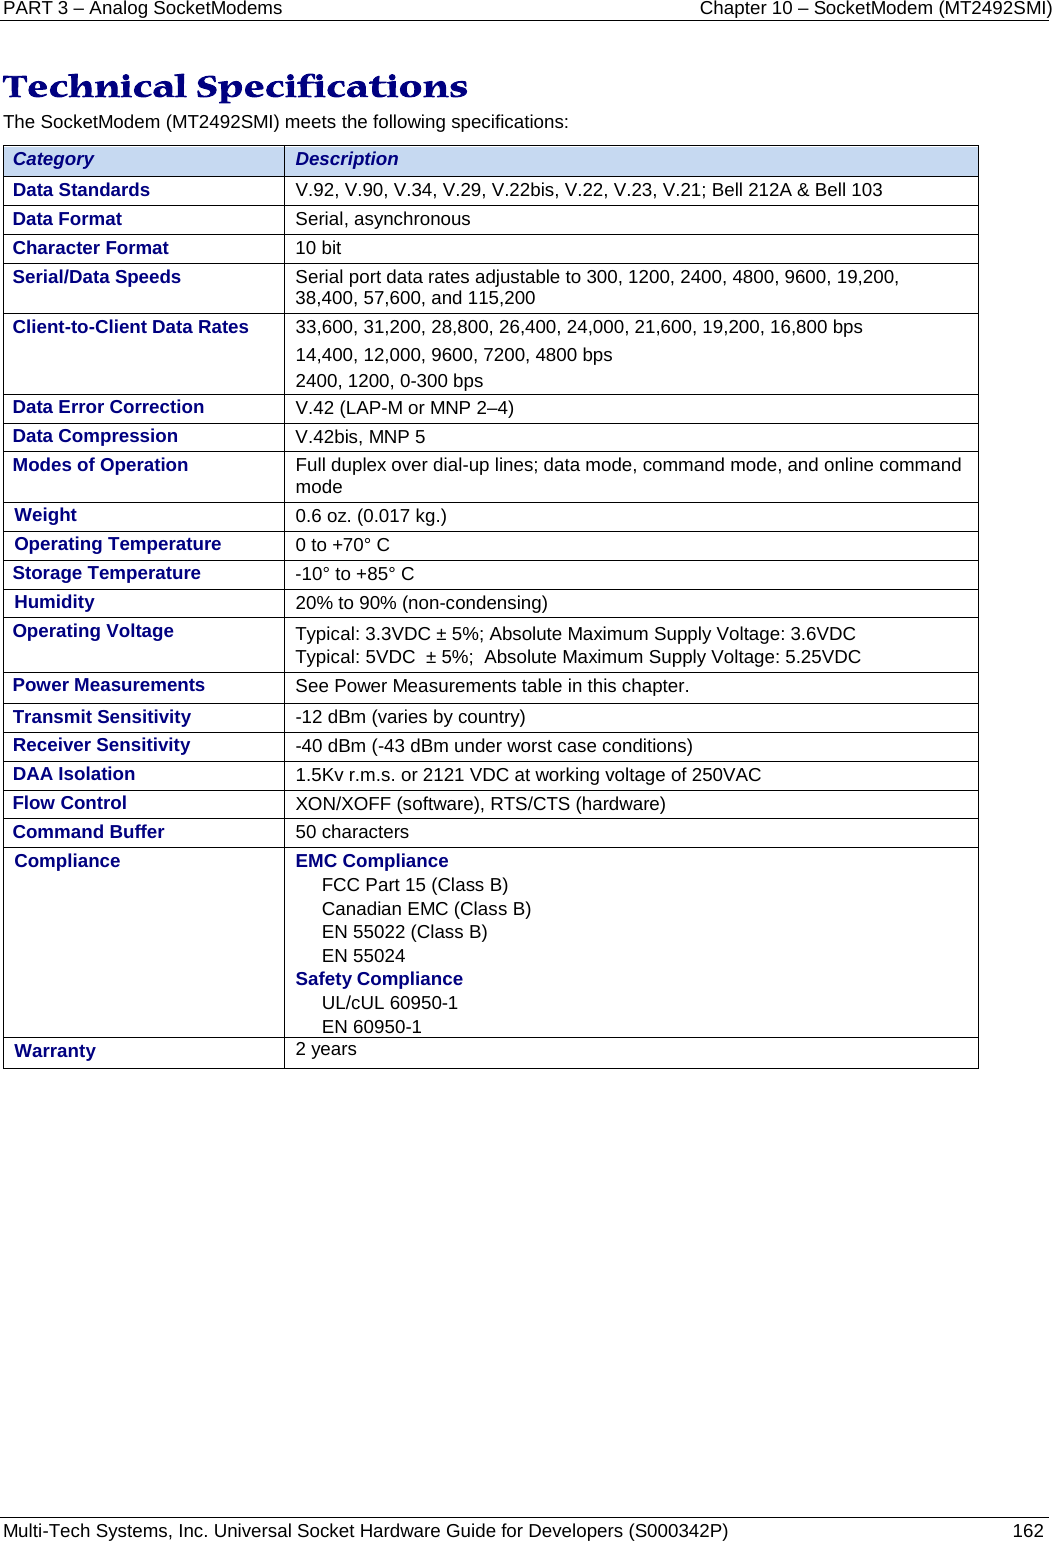 PART 3 – Analog SocketModems     Chapter 10 – SocketModem (MT2492SMI) Multi-Tech Systems, Inc. Universal Socket Hardware Guide for Developers (S000342P)  162   Technical Specifications The SocketModem (MT2492SMI) meets the following specifications:  Category Description Data Standards V.92, V.90, V.34, V.29, V.22bis, V.22, V.23, V.21; Bell 212A &amp; Bell 103  Data Format Serial, asynchronous Character Format 10 bit Serial/Data Speeds  Serial port data rates adjustable to 300, 1200, 2400, 4800, 9600, 19,200, 38,400, 57,600, and 115,200 Client-to-Client Data Rates 33,600, 31,200, 28,800, 26,400, 24,000, 21,600, 19,200, 16,800 bps 14,400, 12,000, 9600, 7200, 4800 bps 2400, 1200, 0-300 bps Data Error Correction V.42 (LAP-M or MNP 2–4) Data Compression V.42bis, MNP 5 Modes of Operation Full duplex over dial-up lines; data mode, command mode, and online command mode Weight 0.6 oz. (0.017 kg.)  Operating Temperature  0 to +70° C   Storage Temperature -10° to +85° C Humidity 20% to 90% (non-condensing)   Operating Voltage Typical: 3.3VDC ± 5%; Absolute Maximum Supply Voltage: 3.6VDC Typical: 5VDC  ± 5%;  Absolute Maximum Supply Voltage: 5.25VDC Power Measurements   See Power Measurements table in this chapter. Transmit Sensitivity -12 dBm (varies by country) Receiver Sensitivity -40 dBm (-43 dBm under worst case conditions) DAA Isolation 1.5Kv r.m.s. or 2121 VDC at working voltage of 250VAC Flow Control XON/XOFF (software), RTS/CTS (hardware) Command Buffer 50 characters Compliance EMC Compliance FCC Part 15 (Class B) Canadian EMC (Class B) EN 55022 (Class B) EN 55024 Safety Compliance UL/cUL 60950-1 EN 60950-1 Warranty 2 years    